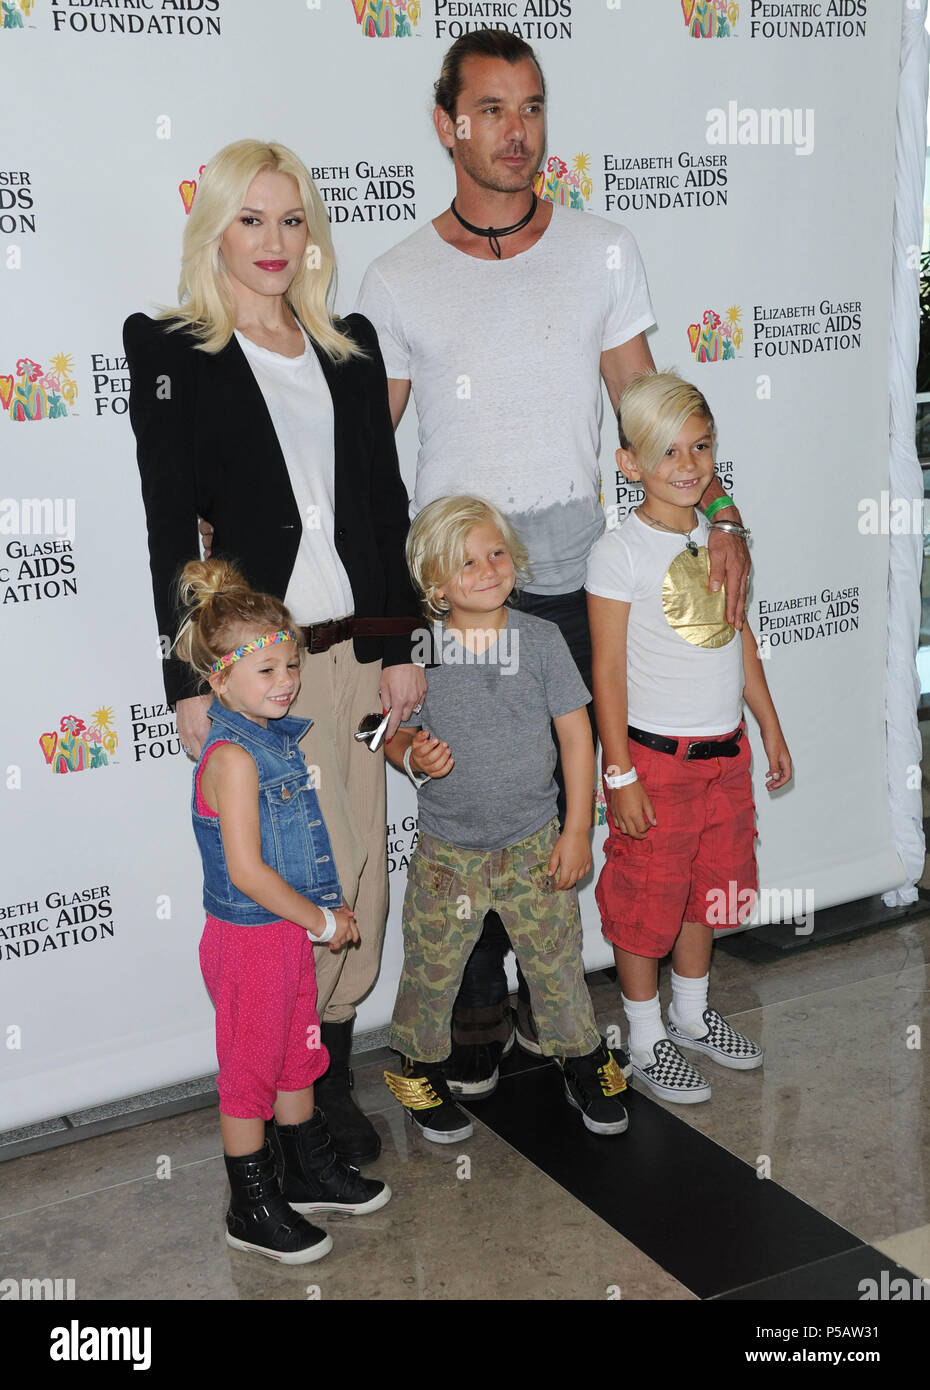 Gwen Stefani, Gavin Rossdale,  Kids Zuma, Kingston and Niece Stella Stefani  arriving the 2013 A Time For Heroes at Century Park In Los Angeles. Elizabeth Glaser Pedriatic Aids Foundation a Gwen Stefani, Gavin Rossdale,  Kids Zuma, Kingston and Niece Stella Stefani 102 ------------- Red Carpet Event, Vertical, USA, Film Industry, Celebrities,  Photography, Bestof, Arts Culture and Entertainment, Topix Celebrities fashion /  Vertical, Best of, Event in Hollywood Life - California,  Red Carpet and backstage, USA, Film Industry, Celebrities,  movie celebrities, TV celebrities, Music celebrities,  Stock Photo